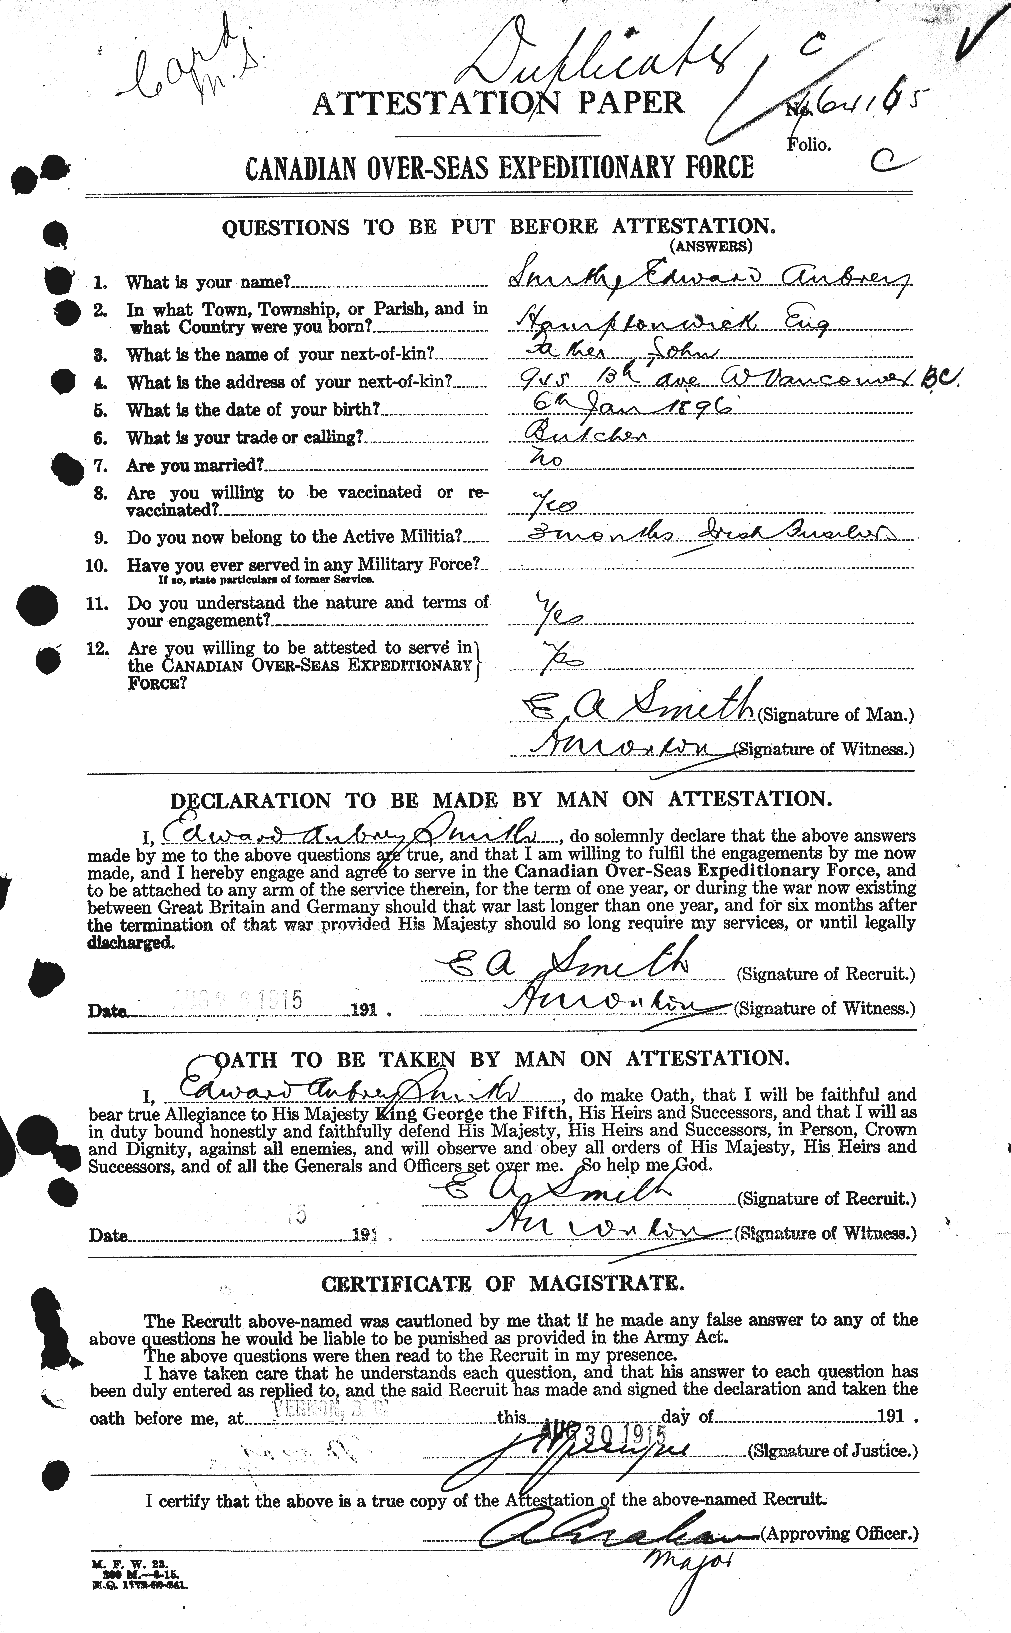 Personnel Records of the First World War - CEF 101208a